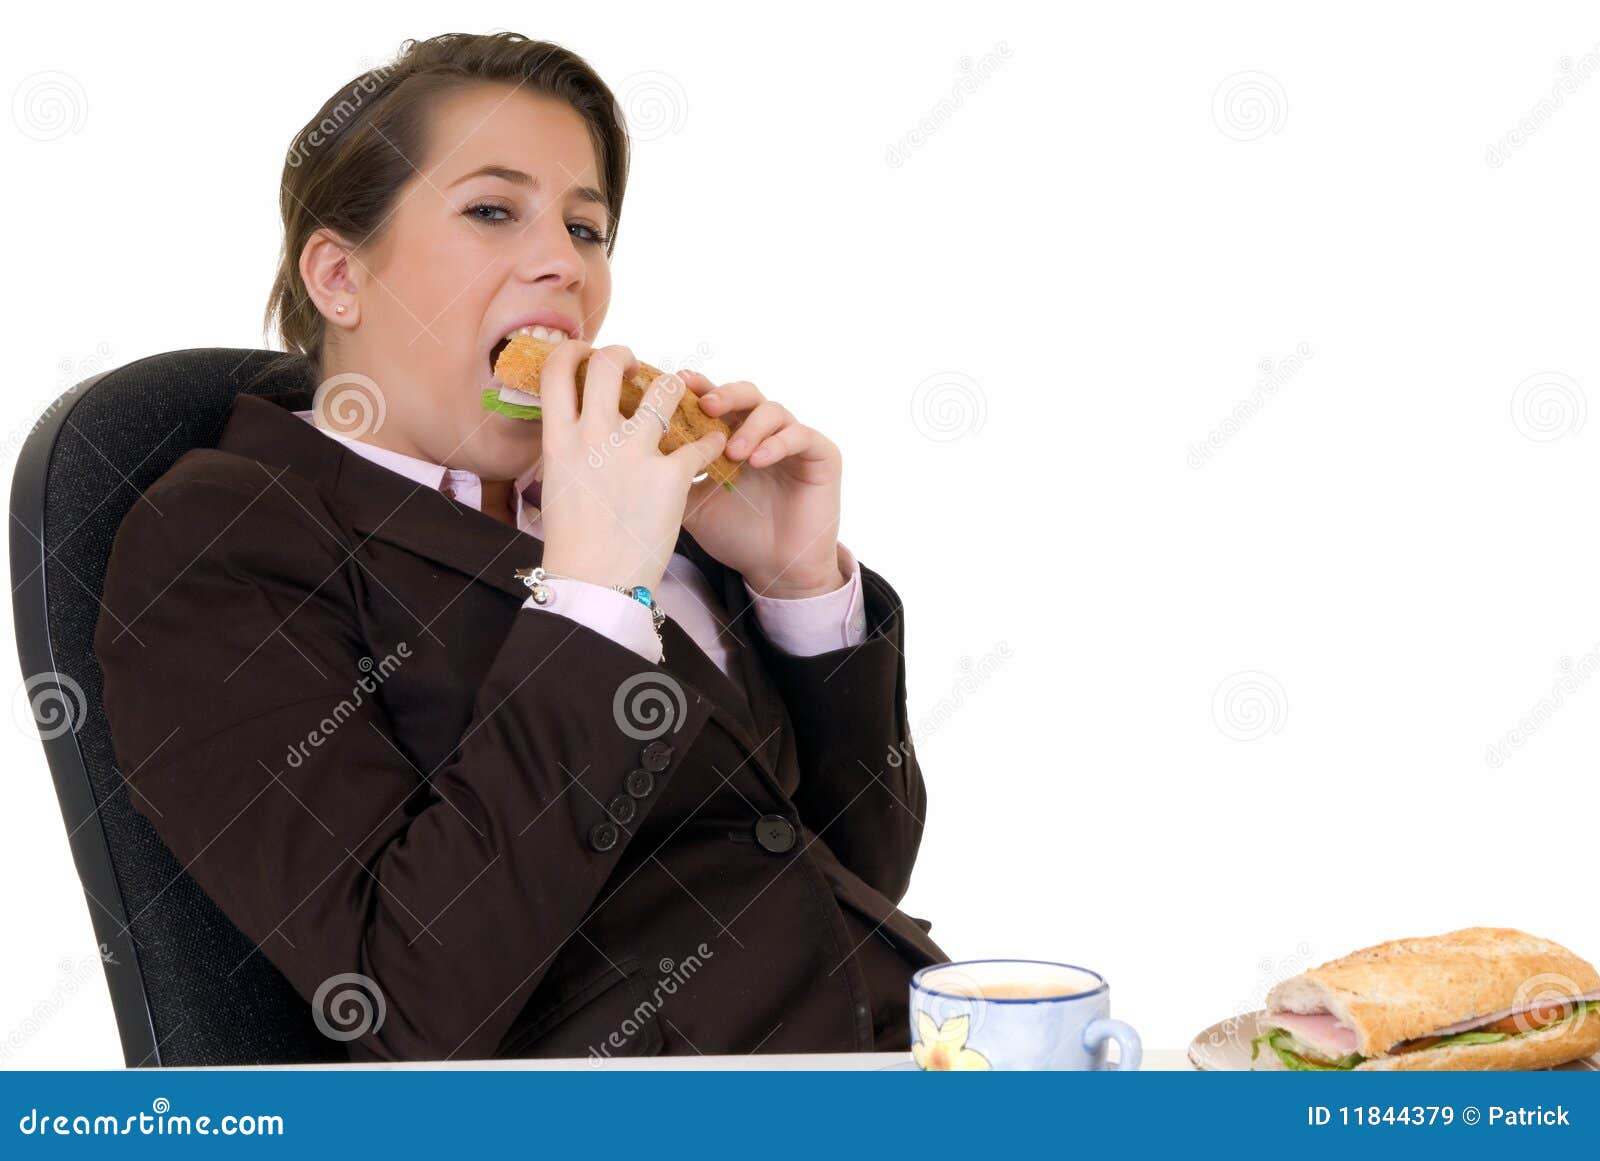 Young Secretary Lunch Break Stock Image Image Of Receptionist